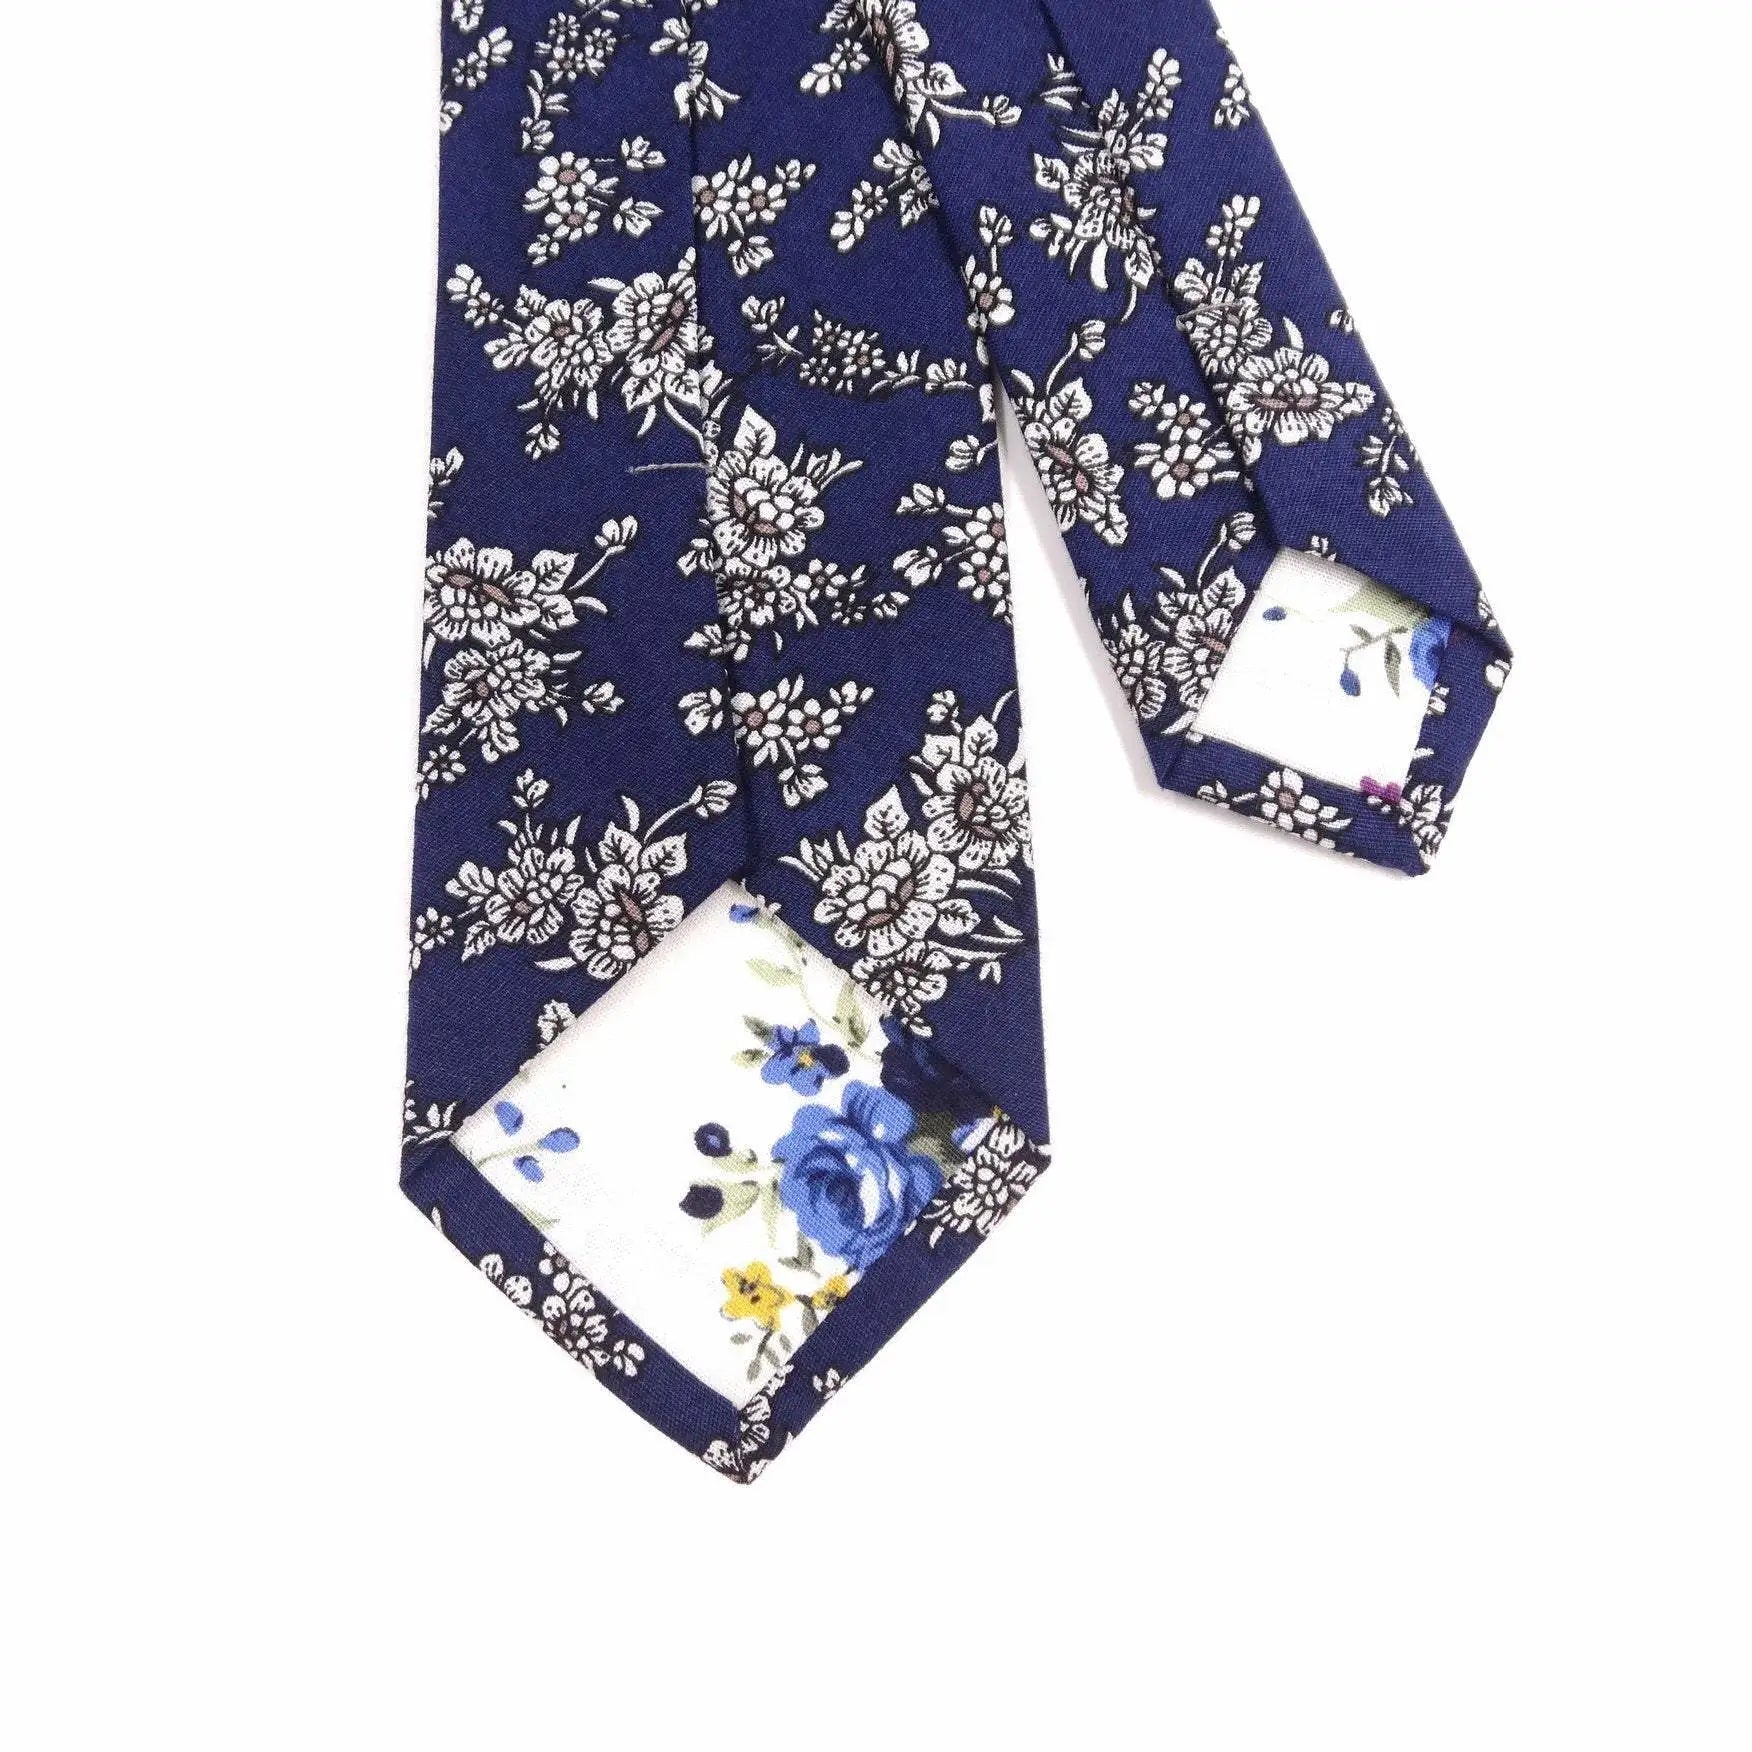 Blue Floral Skinny Tie 2.36&quot; Mytieshop - OZIAS-Neckties-Blue Floral Skinny Tie for weddings and events, great for prom and anniversary gifts. Mens floral ties near me us ties tie shops cool ties skinny tie-Mytieshop. Skinny ties for weddings anniversaries. Father of bride. Groomsmen. Cool skinny neckties for men. Neckwear for prom, missions and fancy events. Gift ideas for men. Anniversaries ideas. Wedding aesthetics. Flower ties. Dry flower ties.